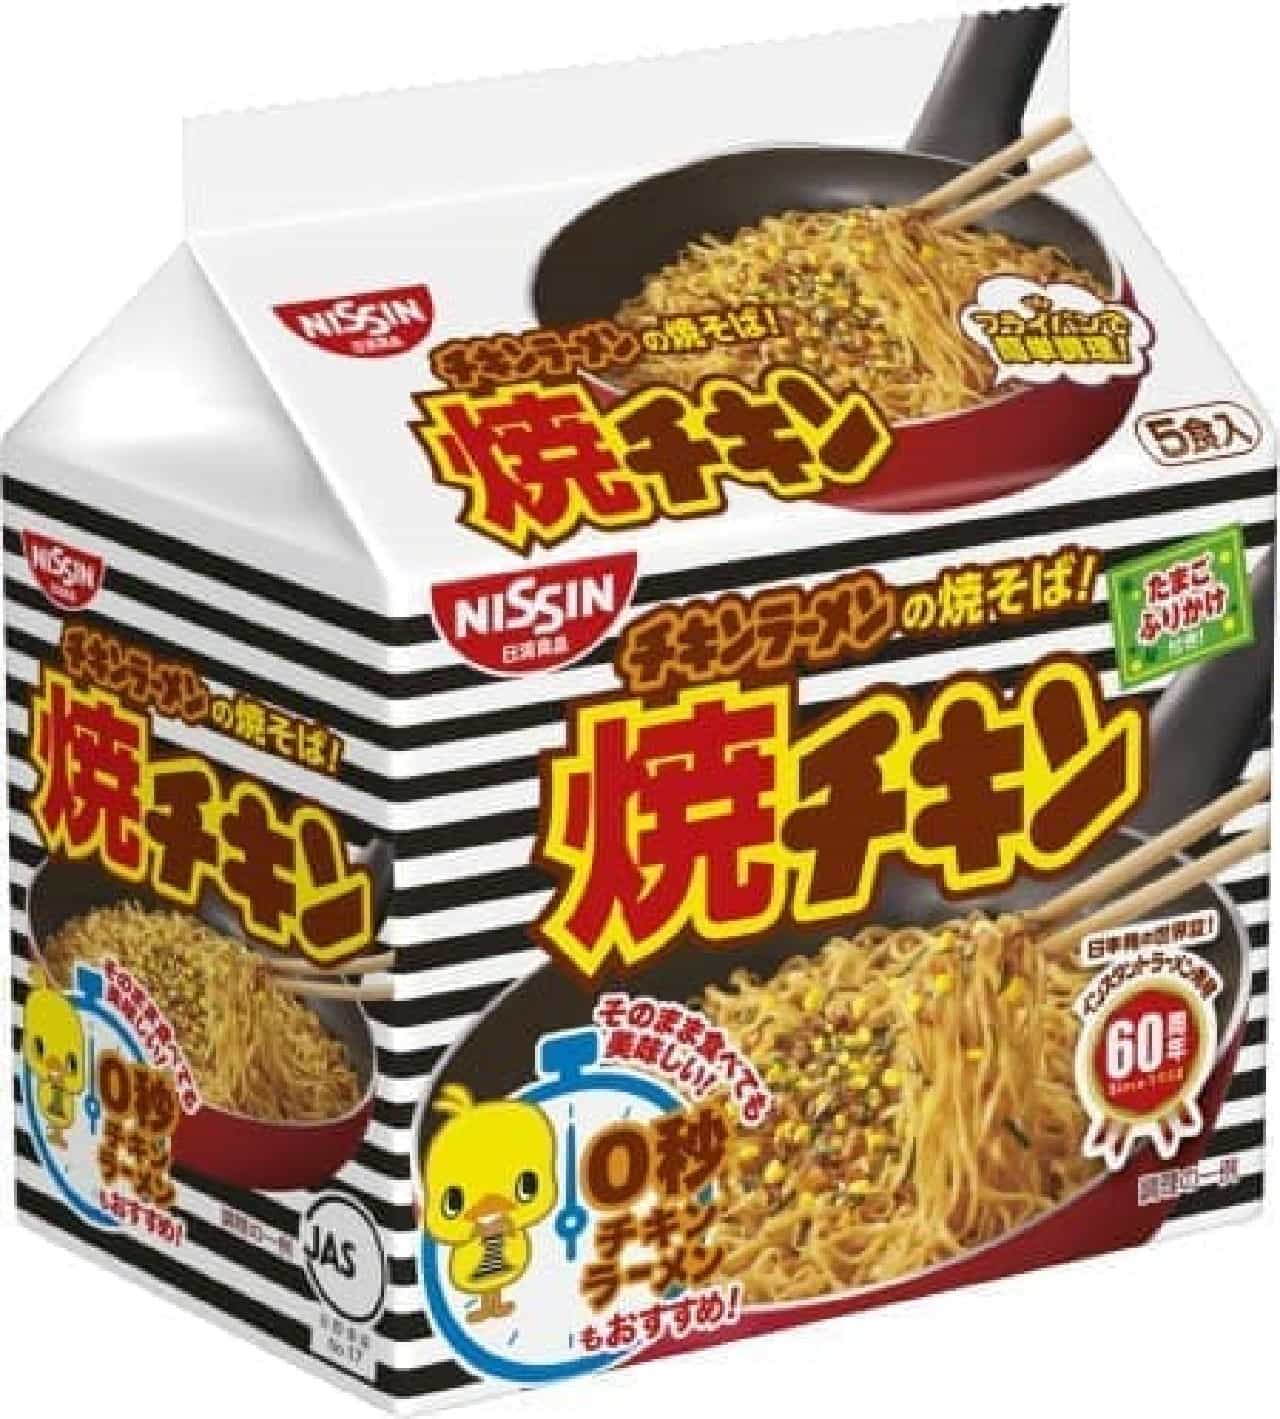 From the Nissin Foods "Chicken Ramen" series, the popular summer product "Yaki Chicken" will be released this year as well.